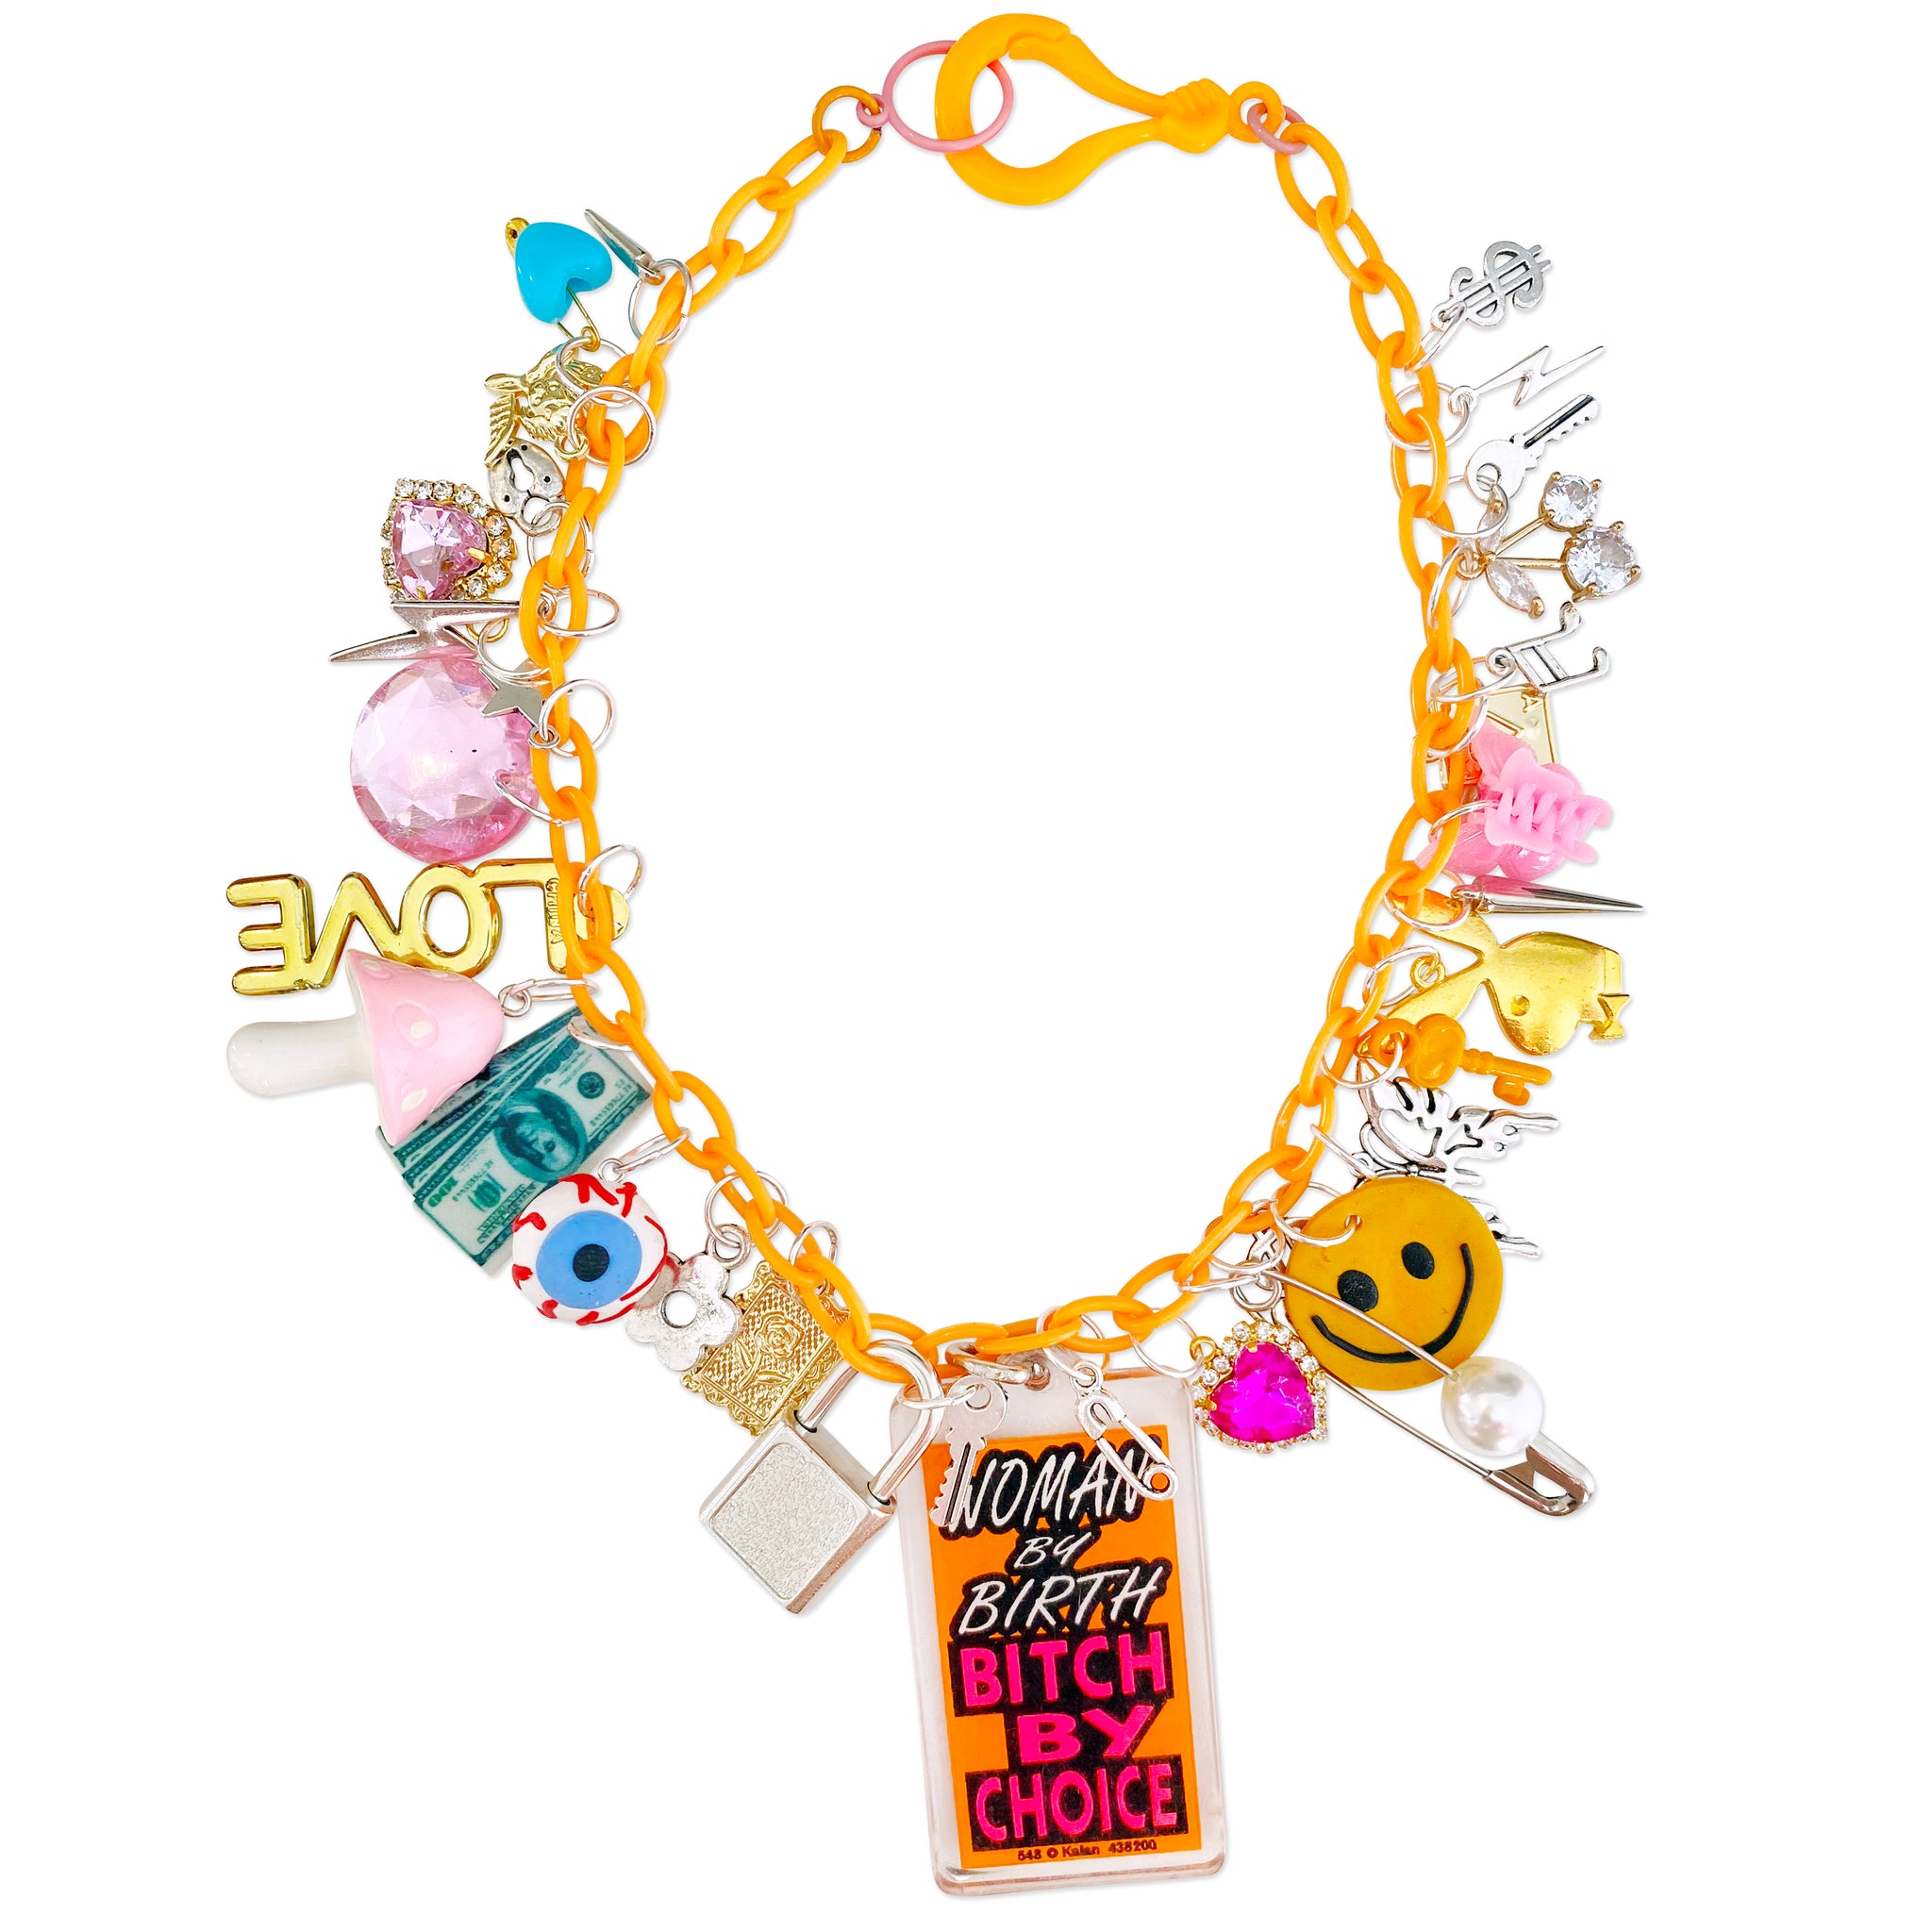 Bitch By Choice Charm Necklace